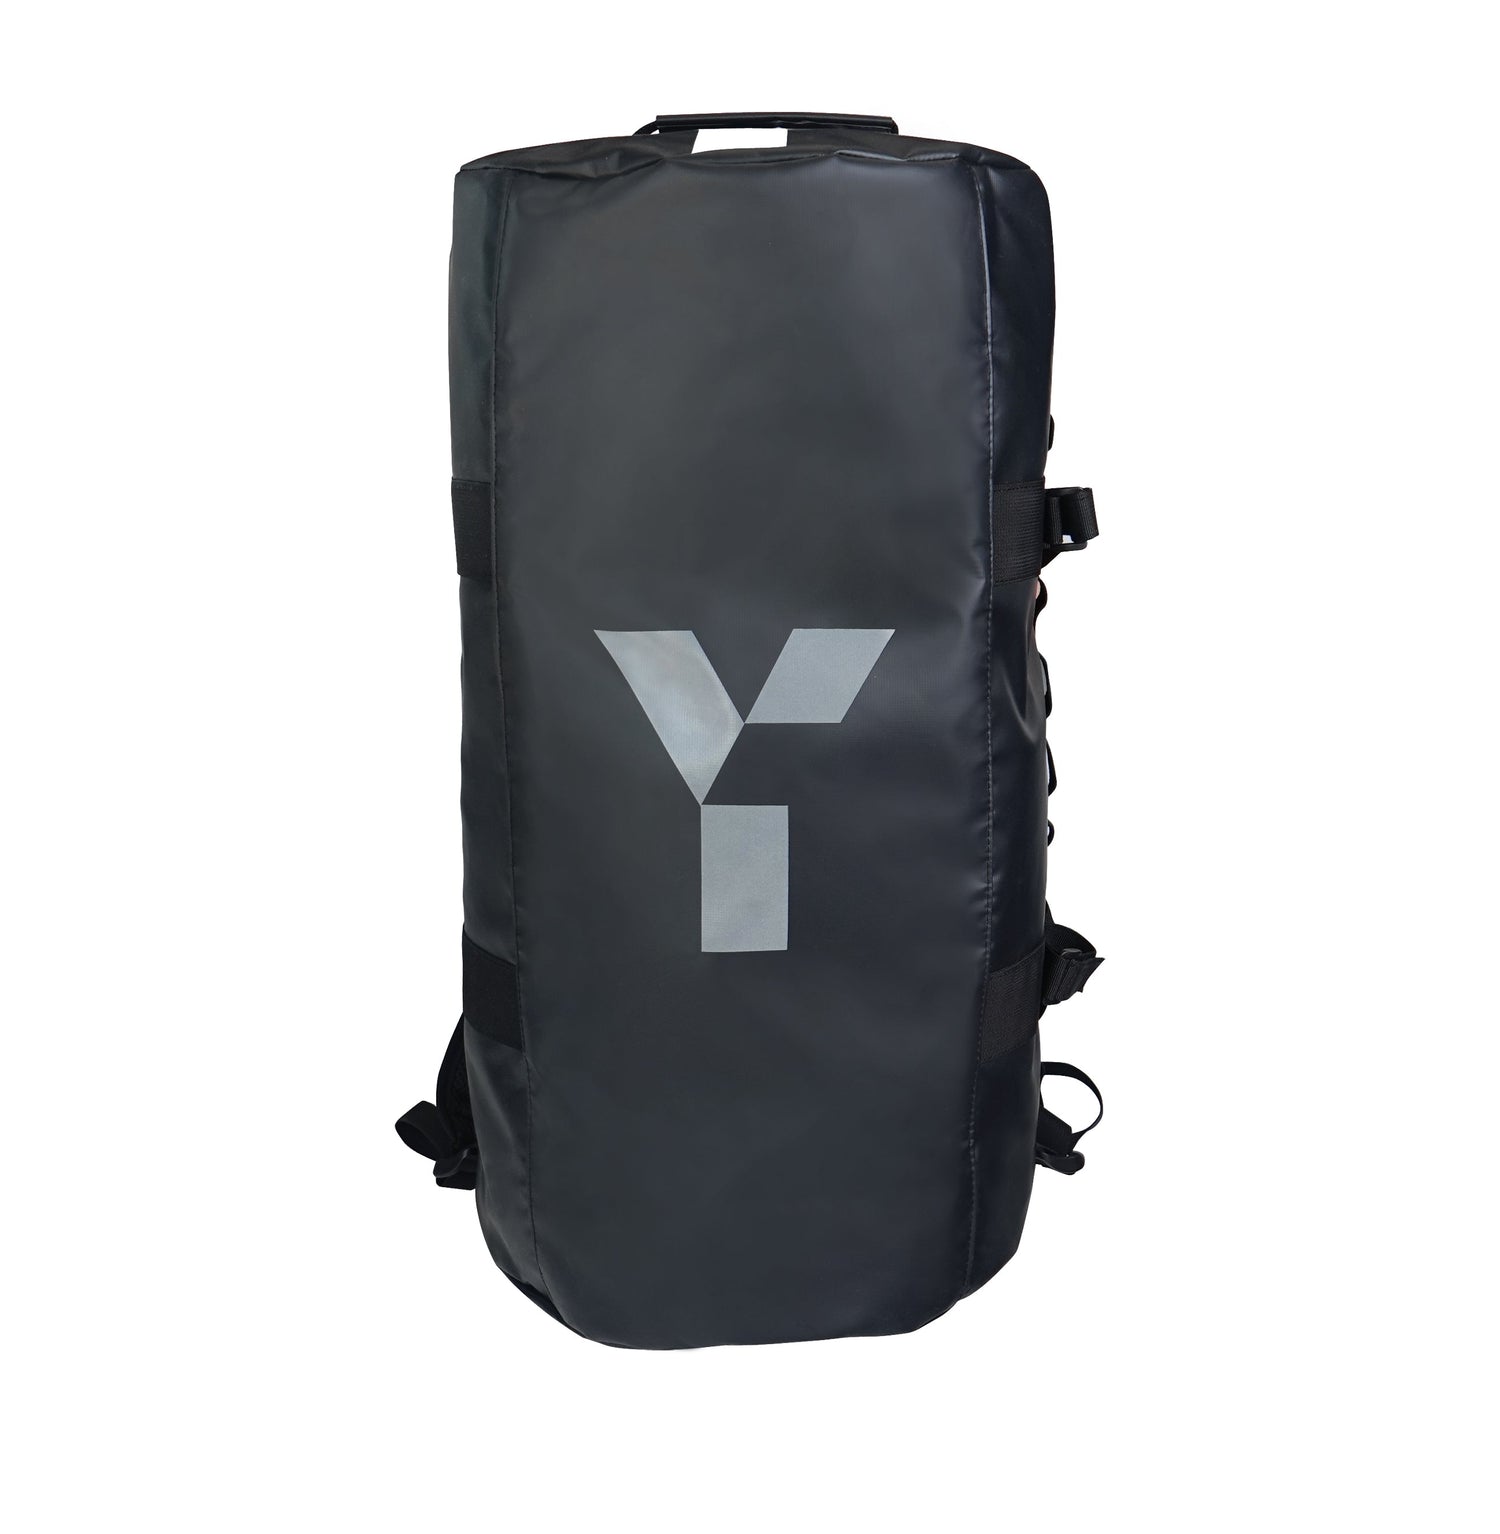 Y1 Matchday Bag